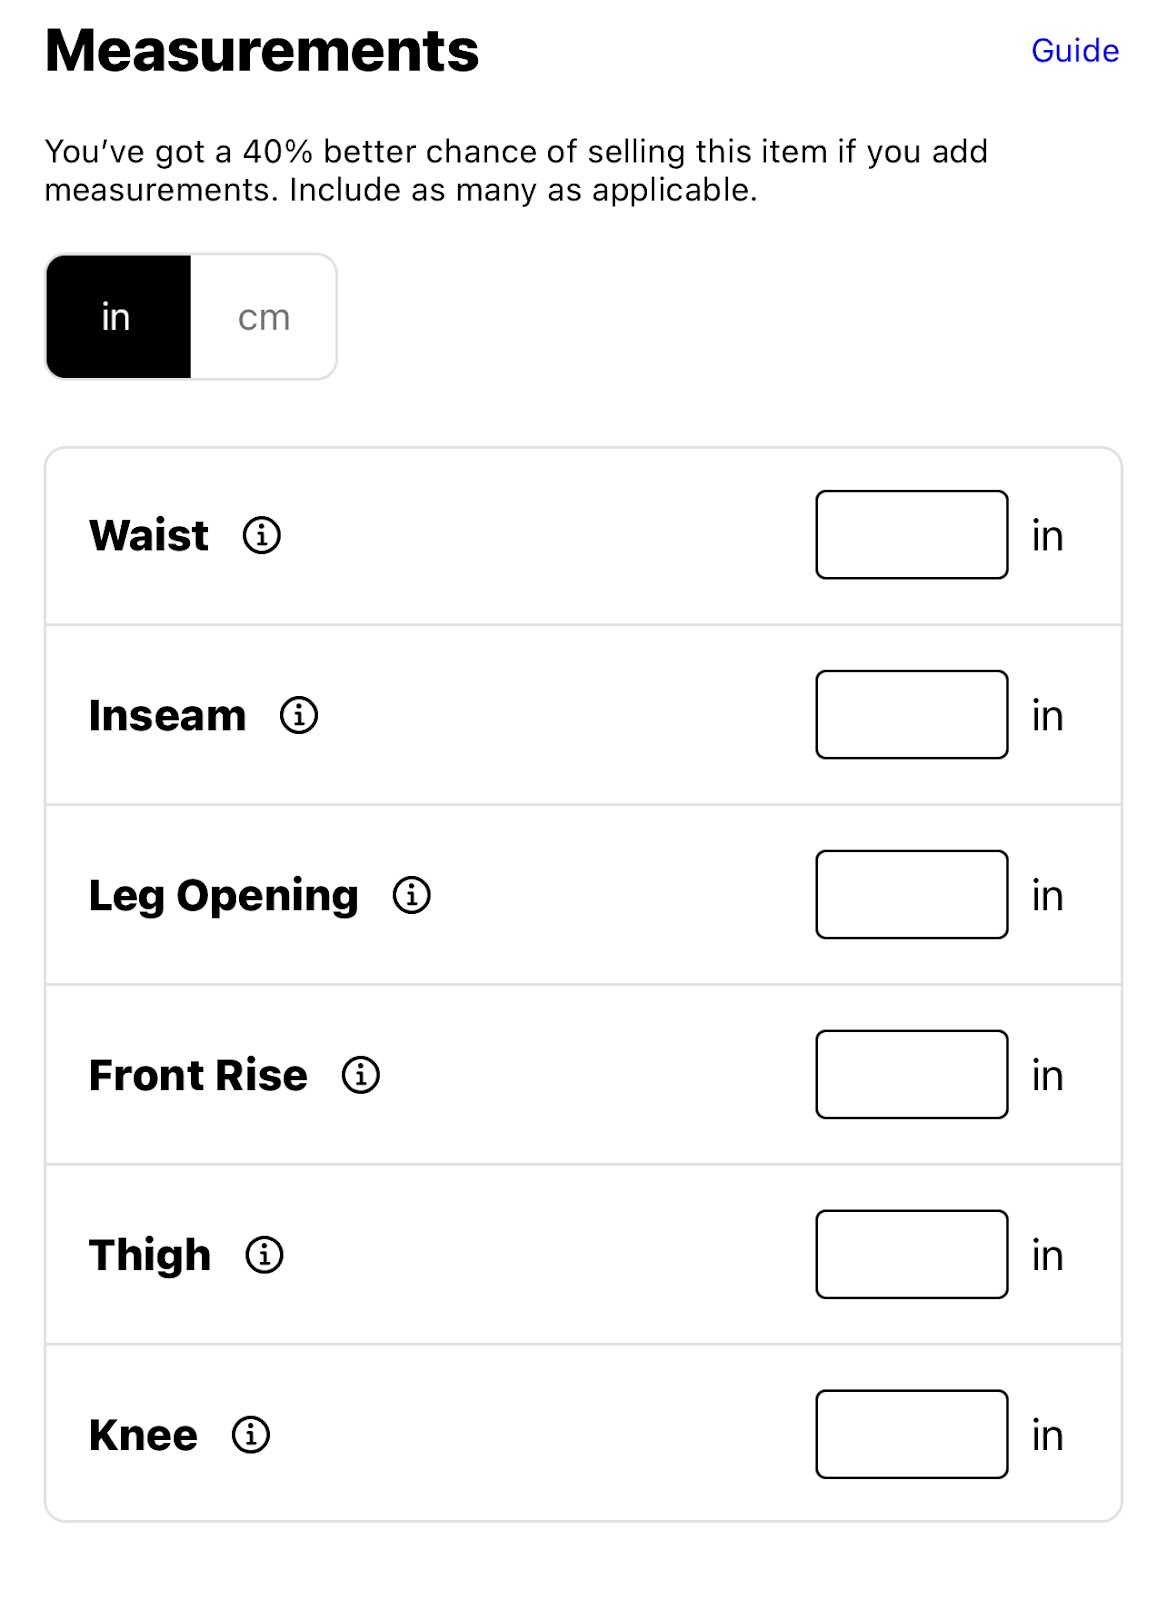 Grailed has a special field prompting you to include the measurements based upon your item.